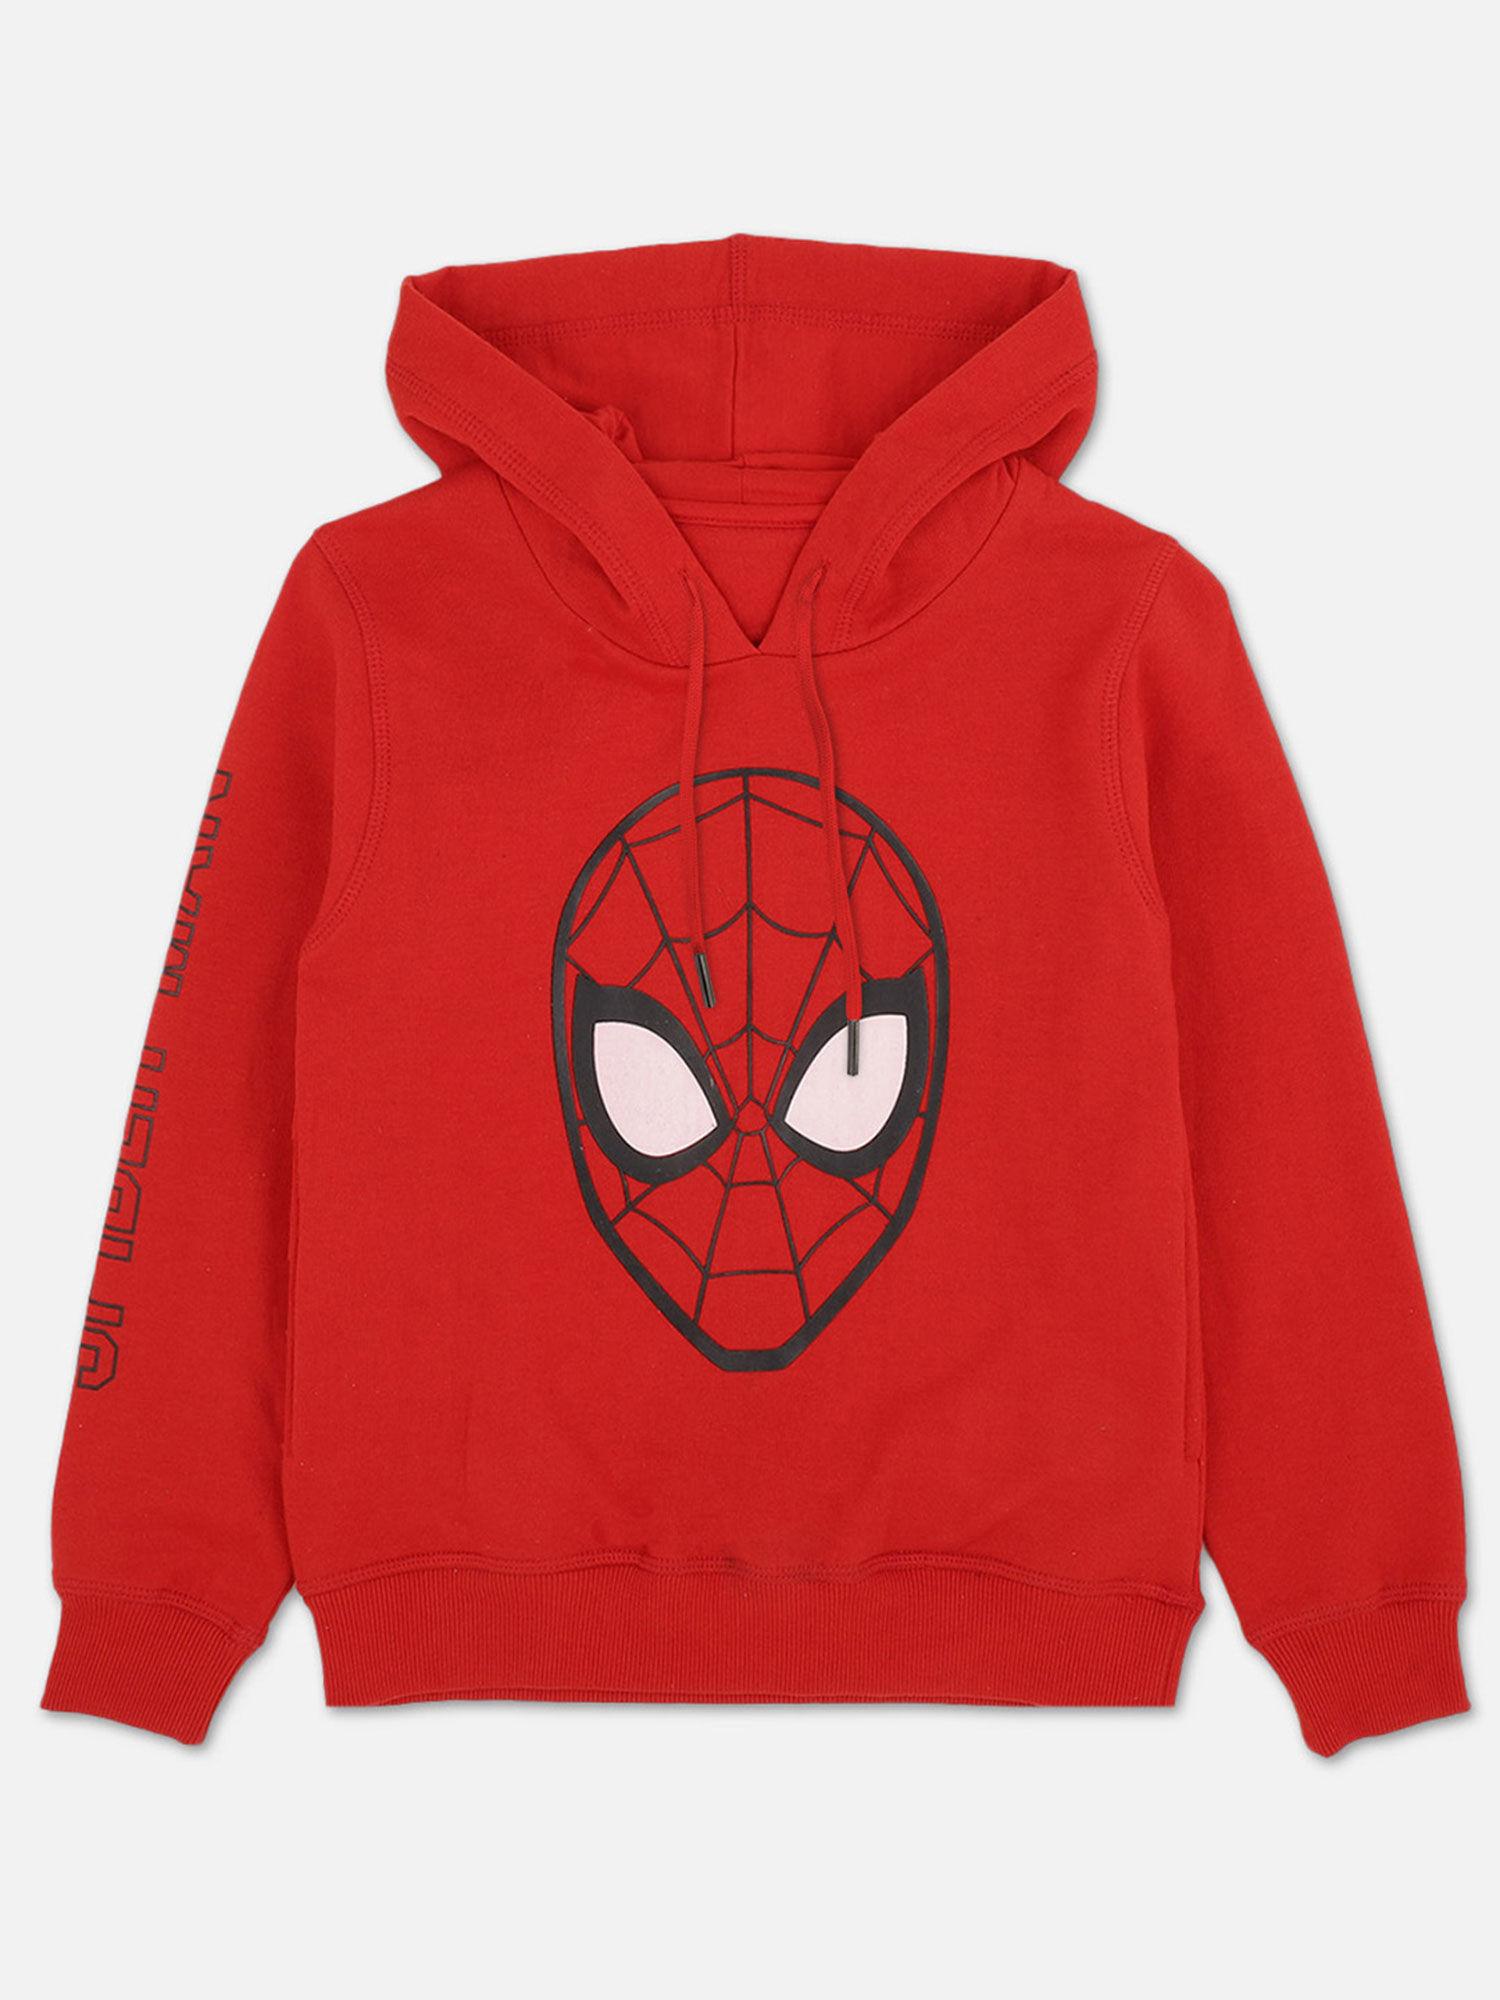 spiderman featured hoodie for boys